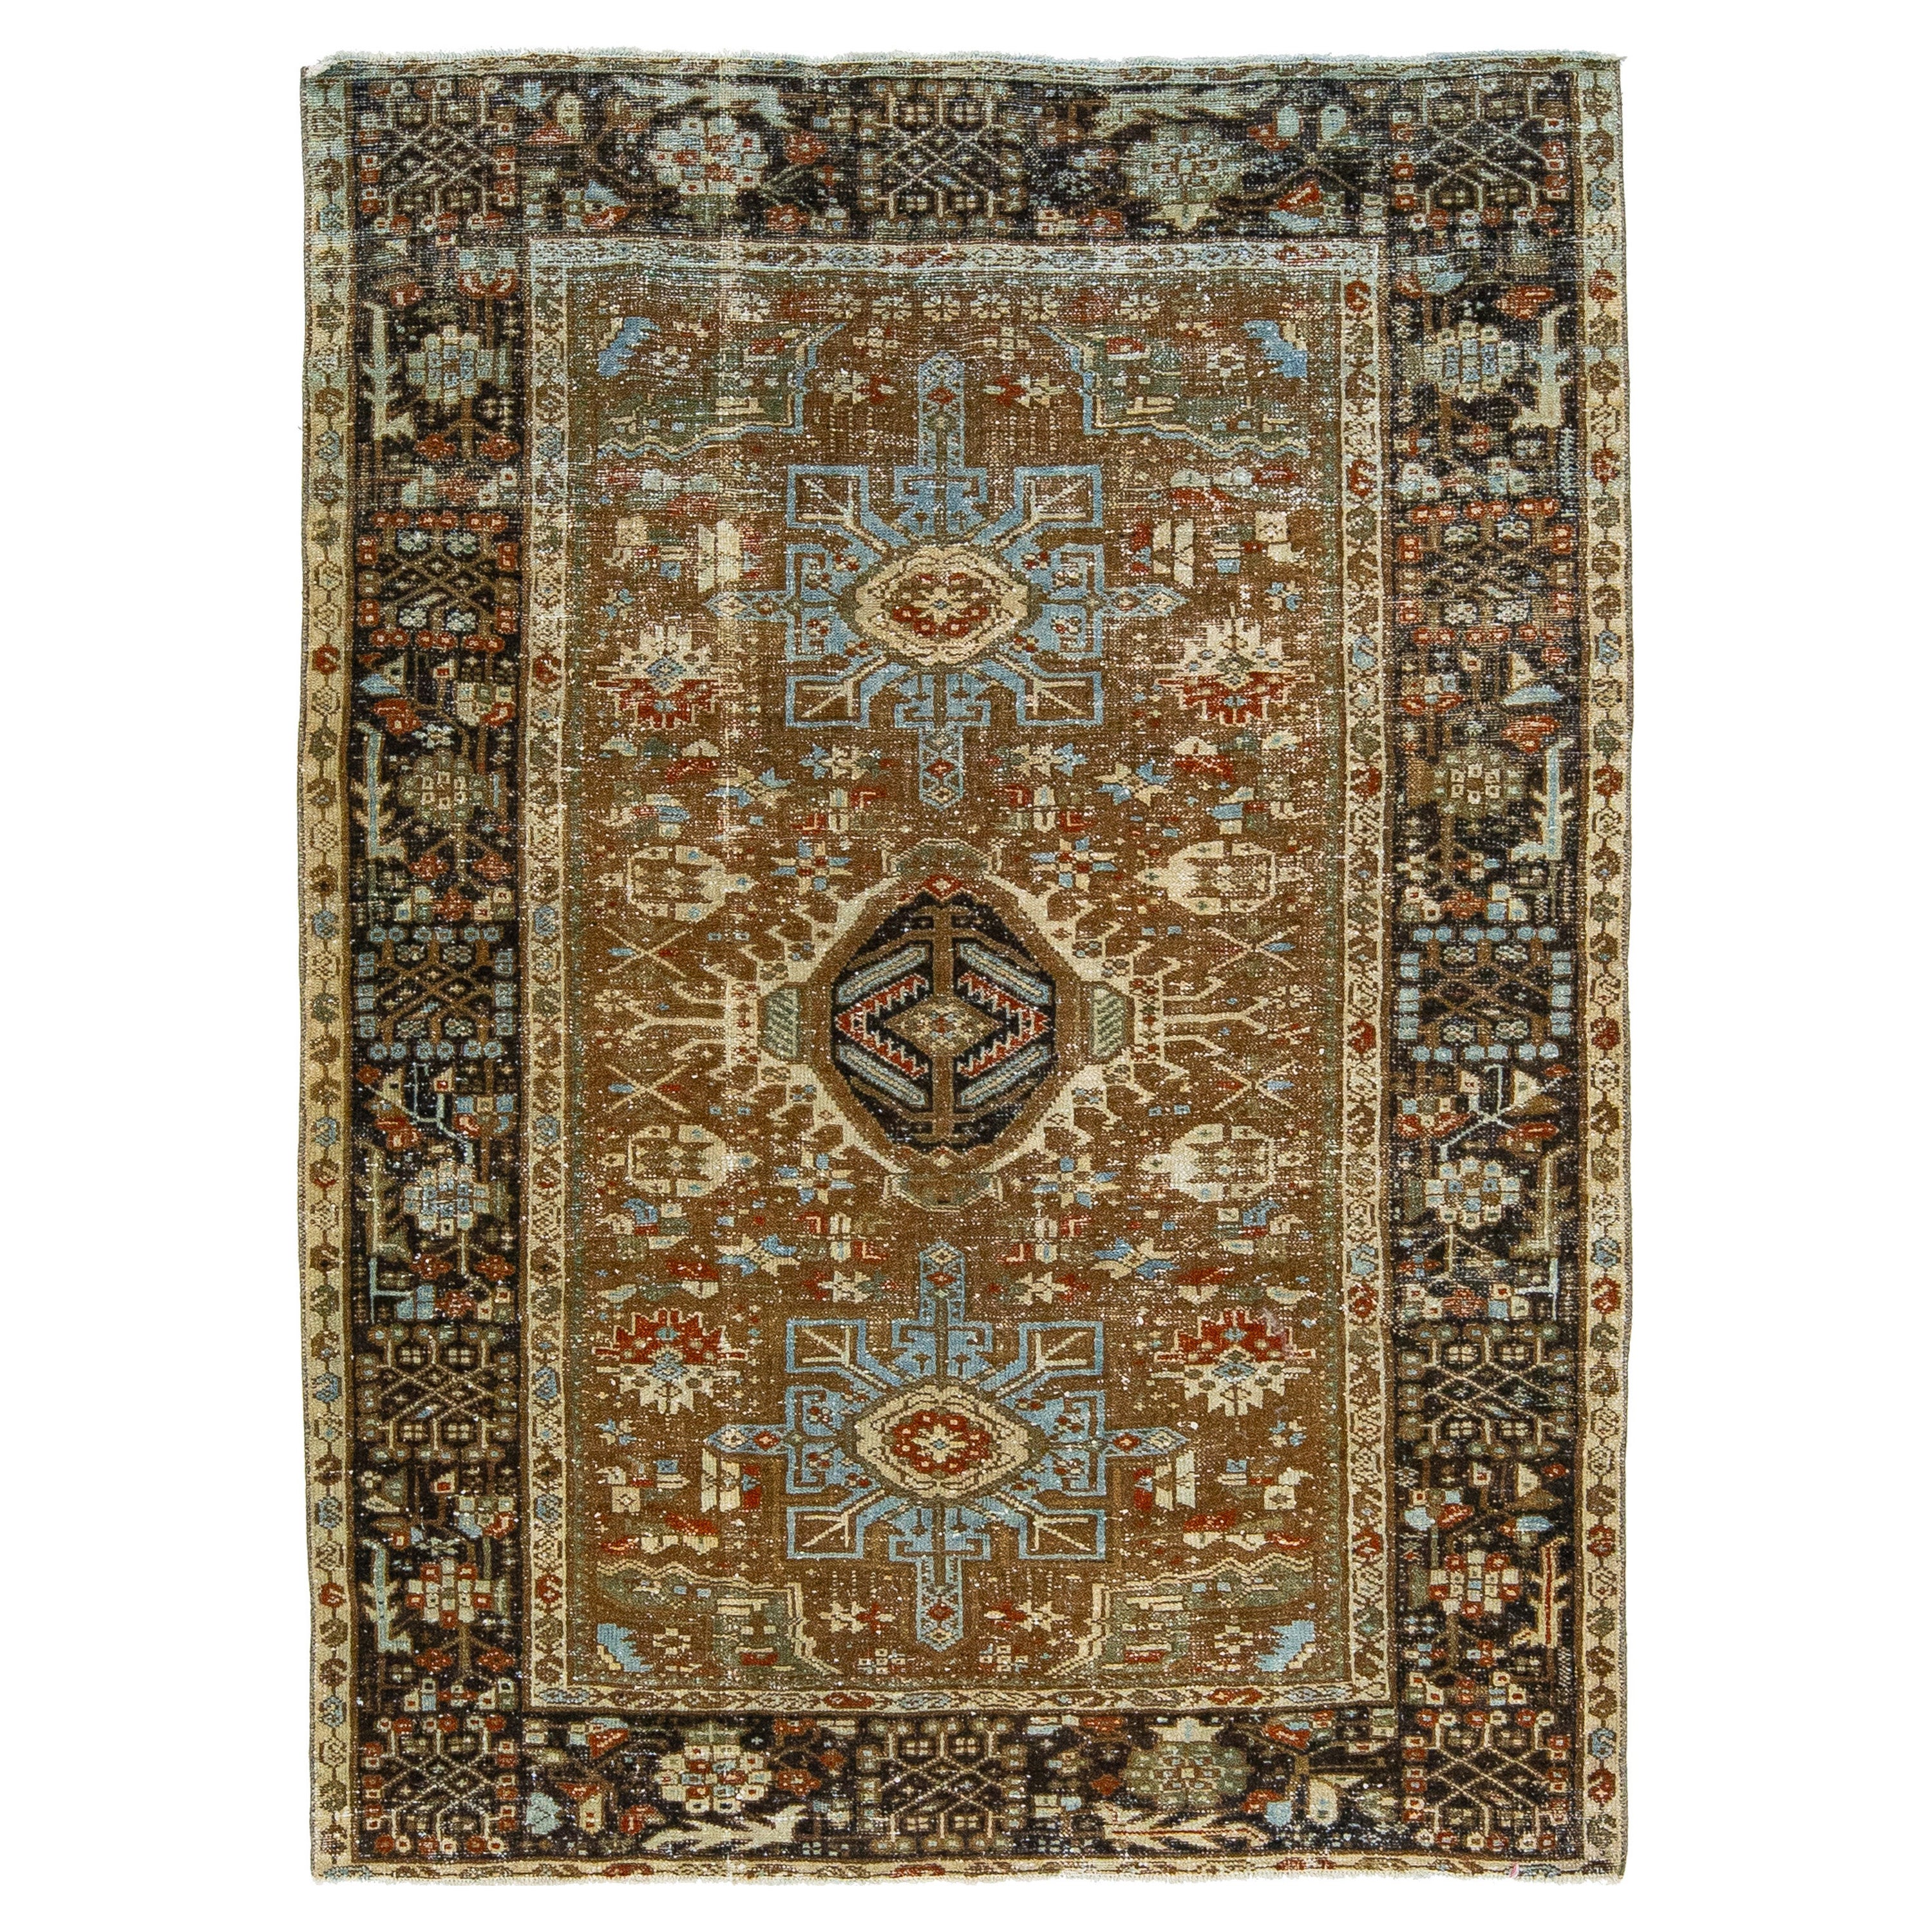 Antique Handmade Persian Scatter Wool Rug with Brown Field